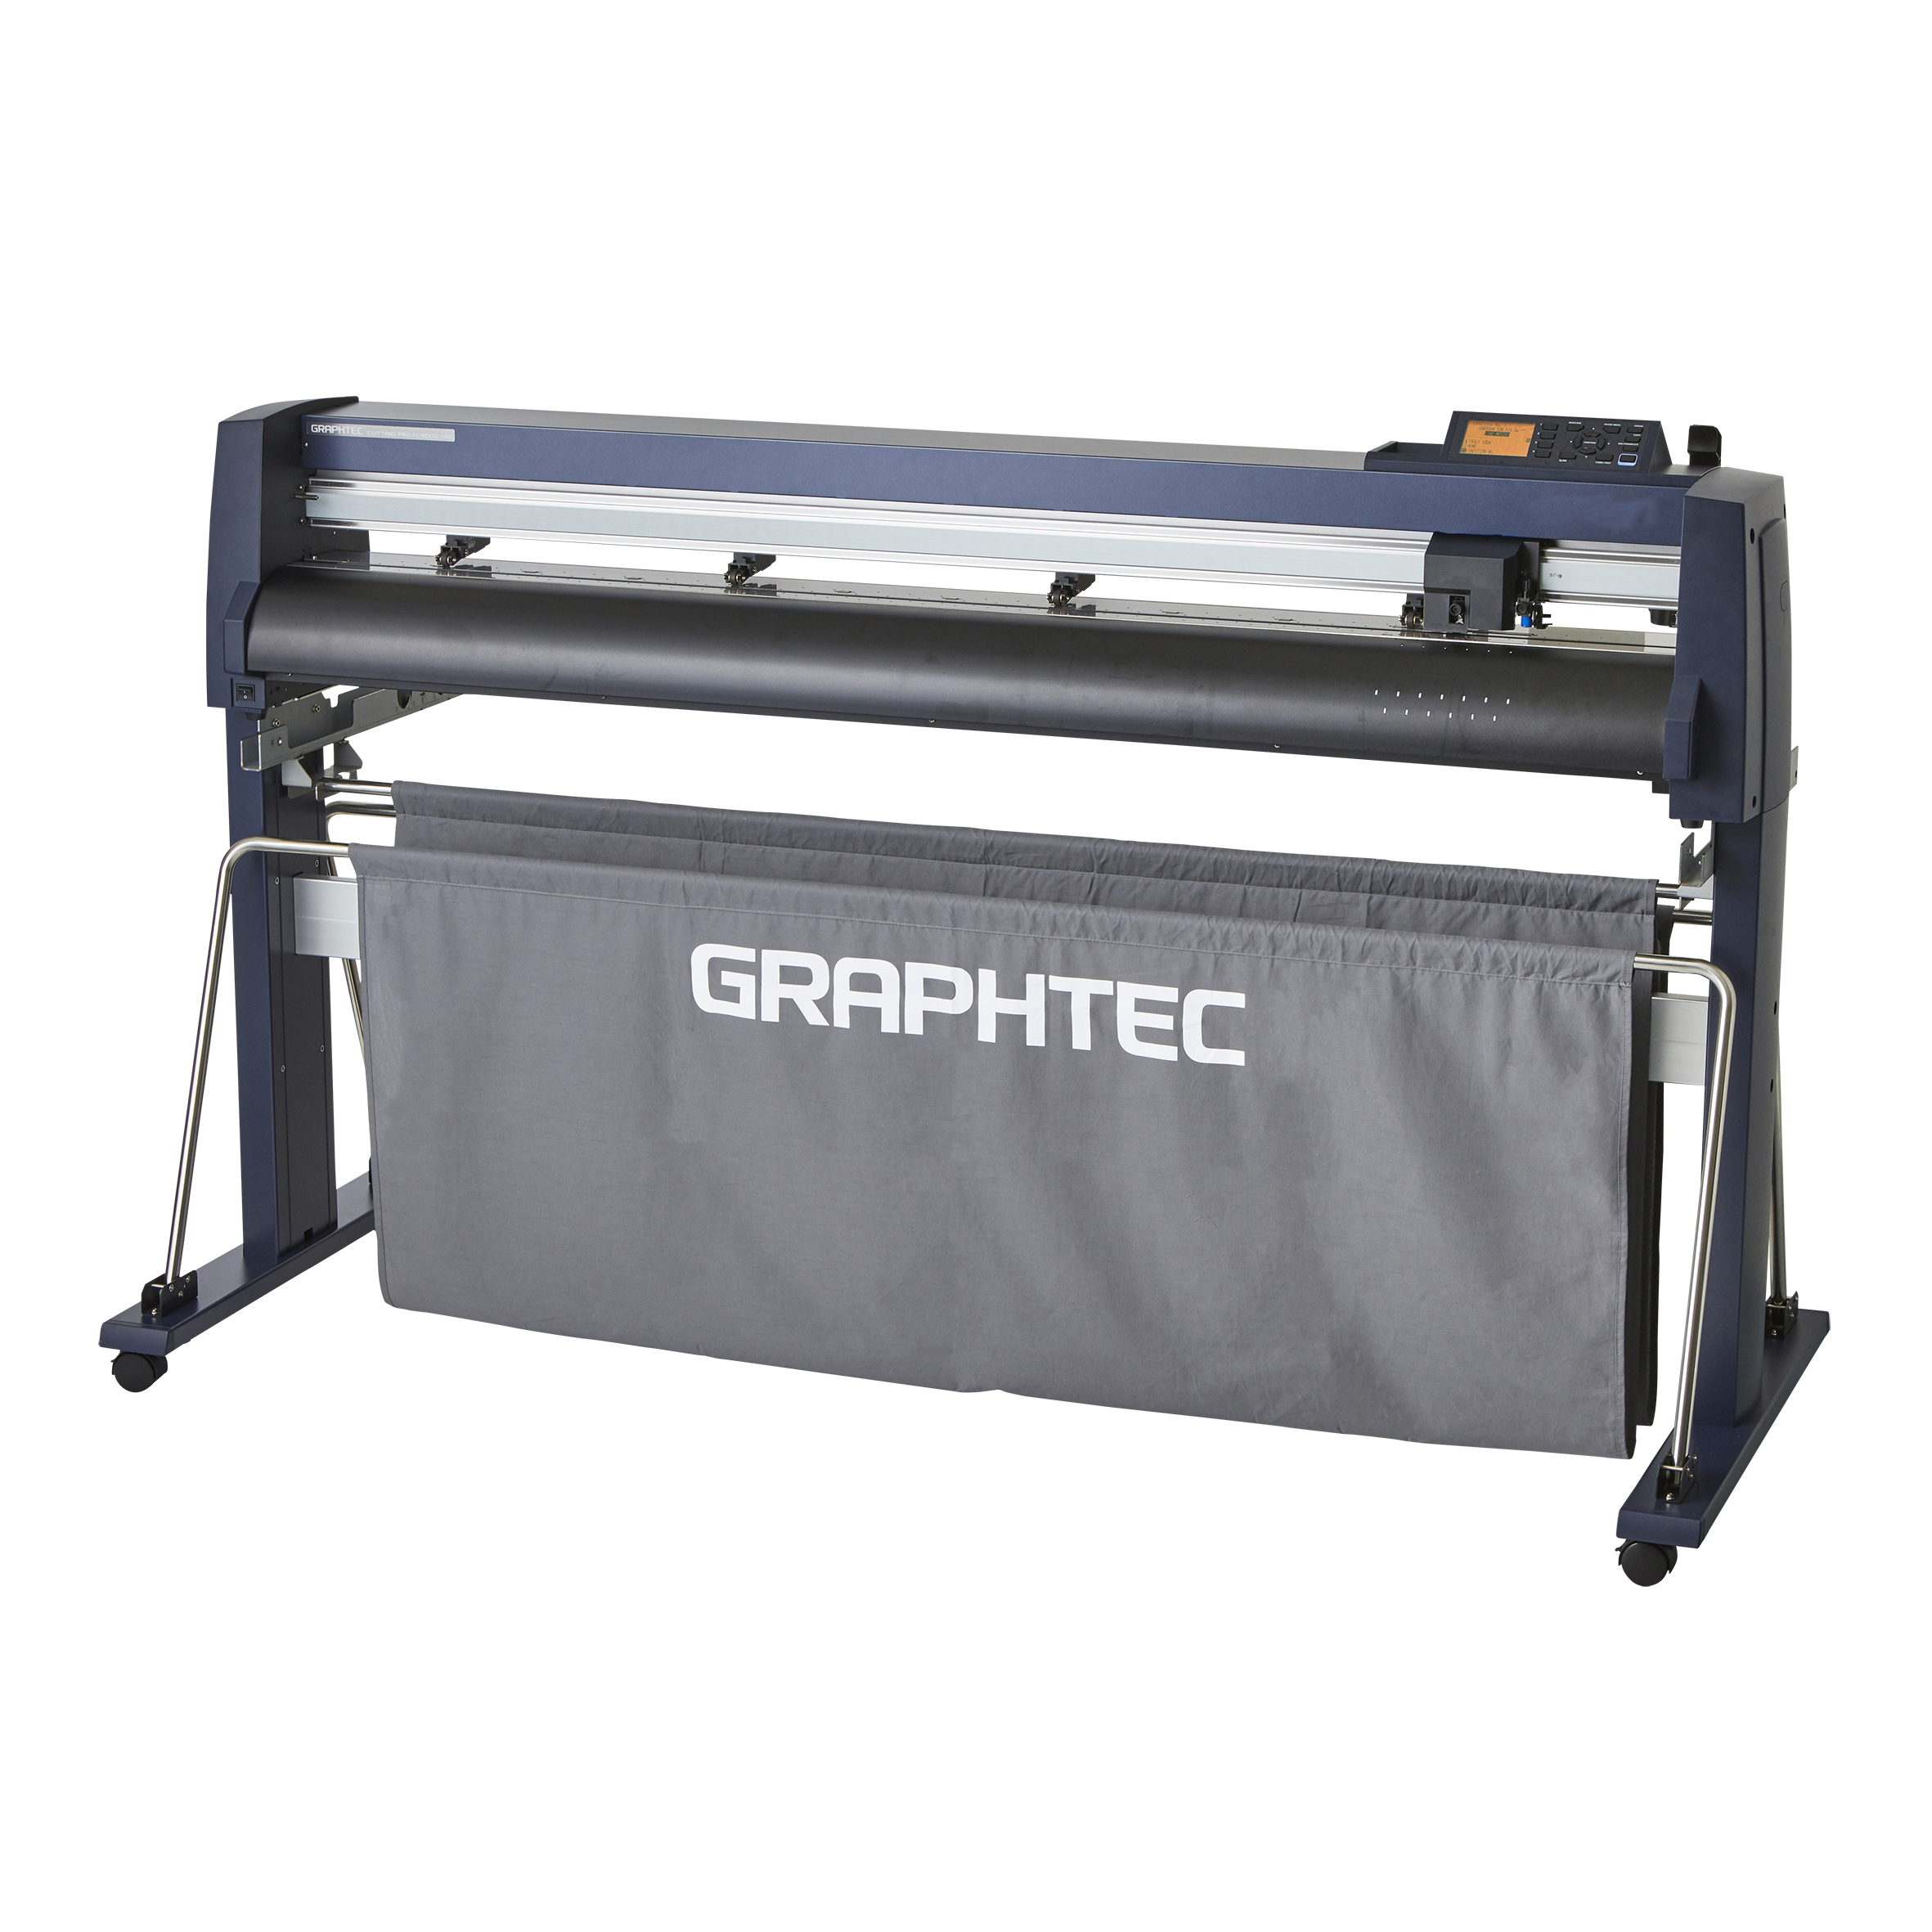 Graphtec FC9000 54" Cutting Plotter- CALL FOR PRICING